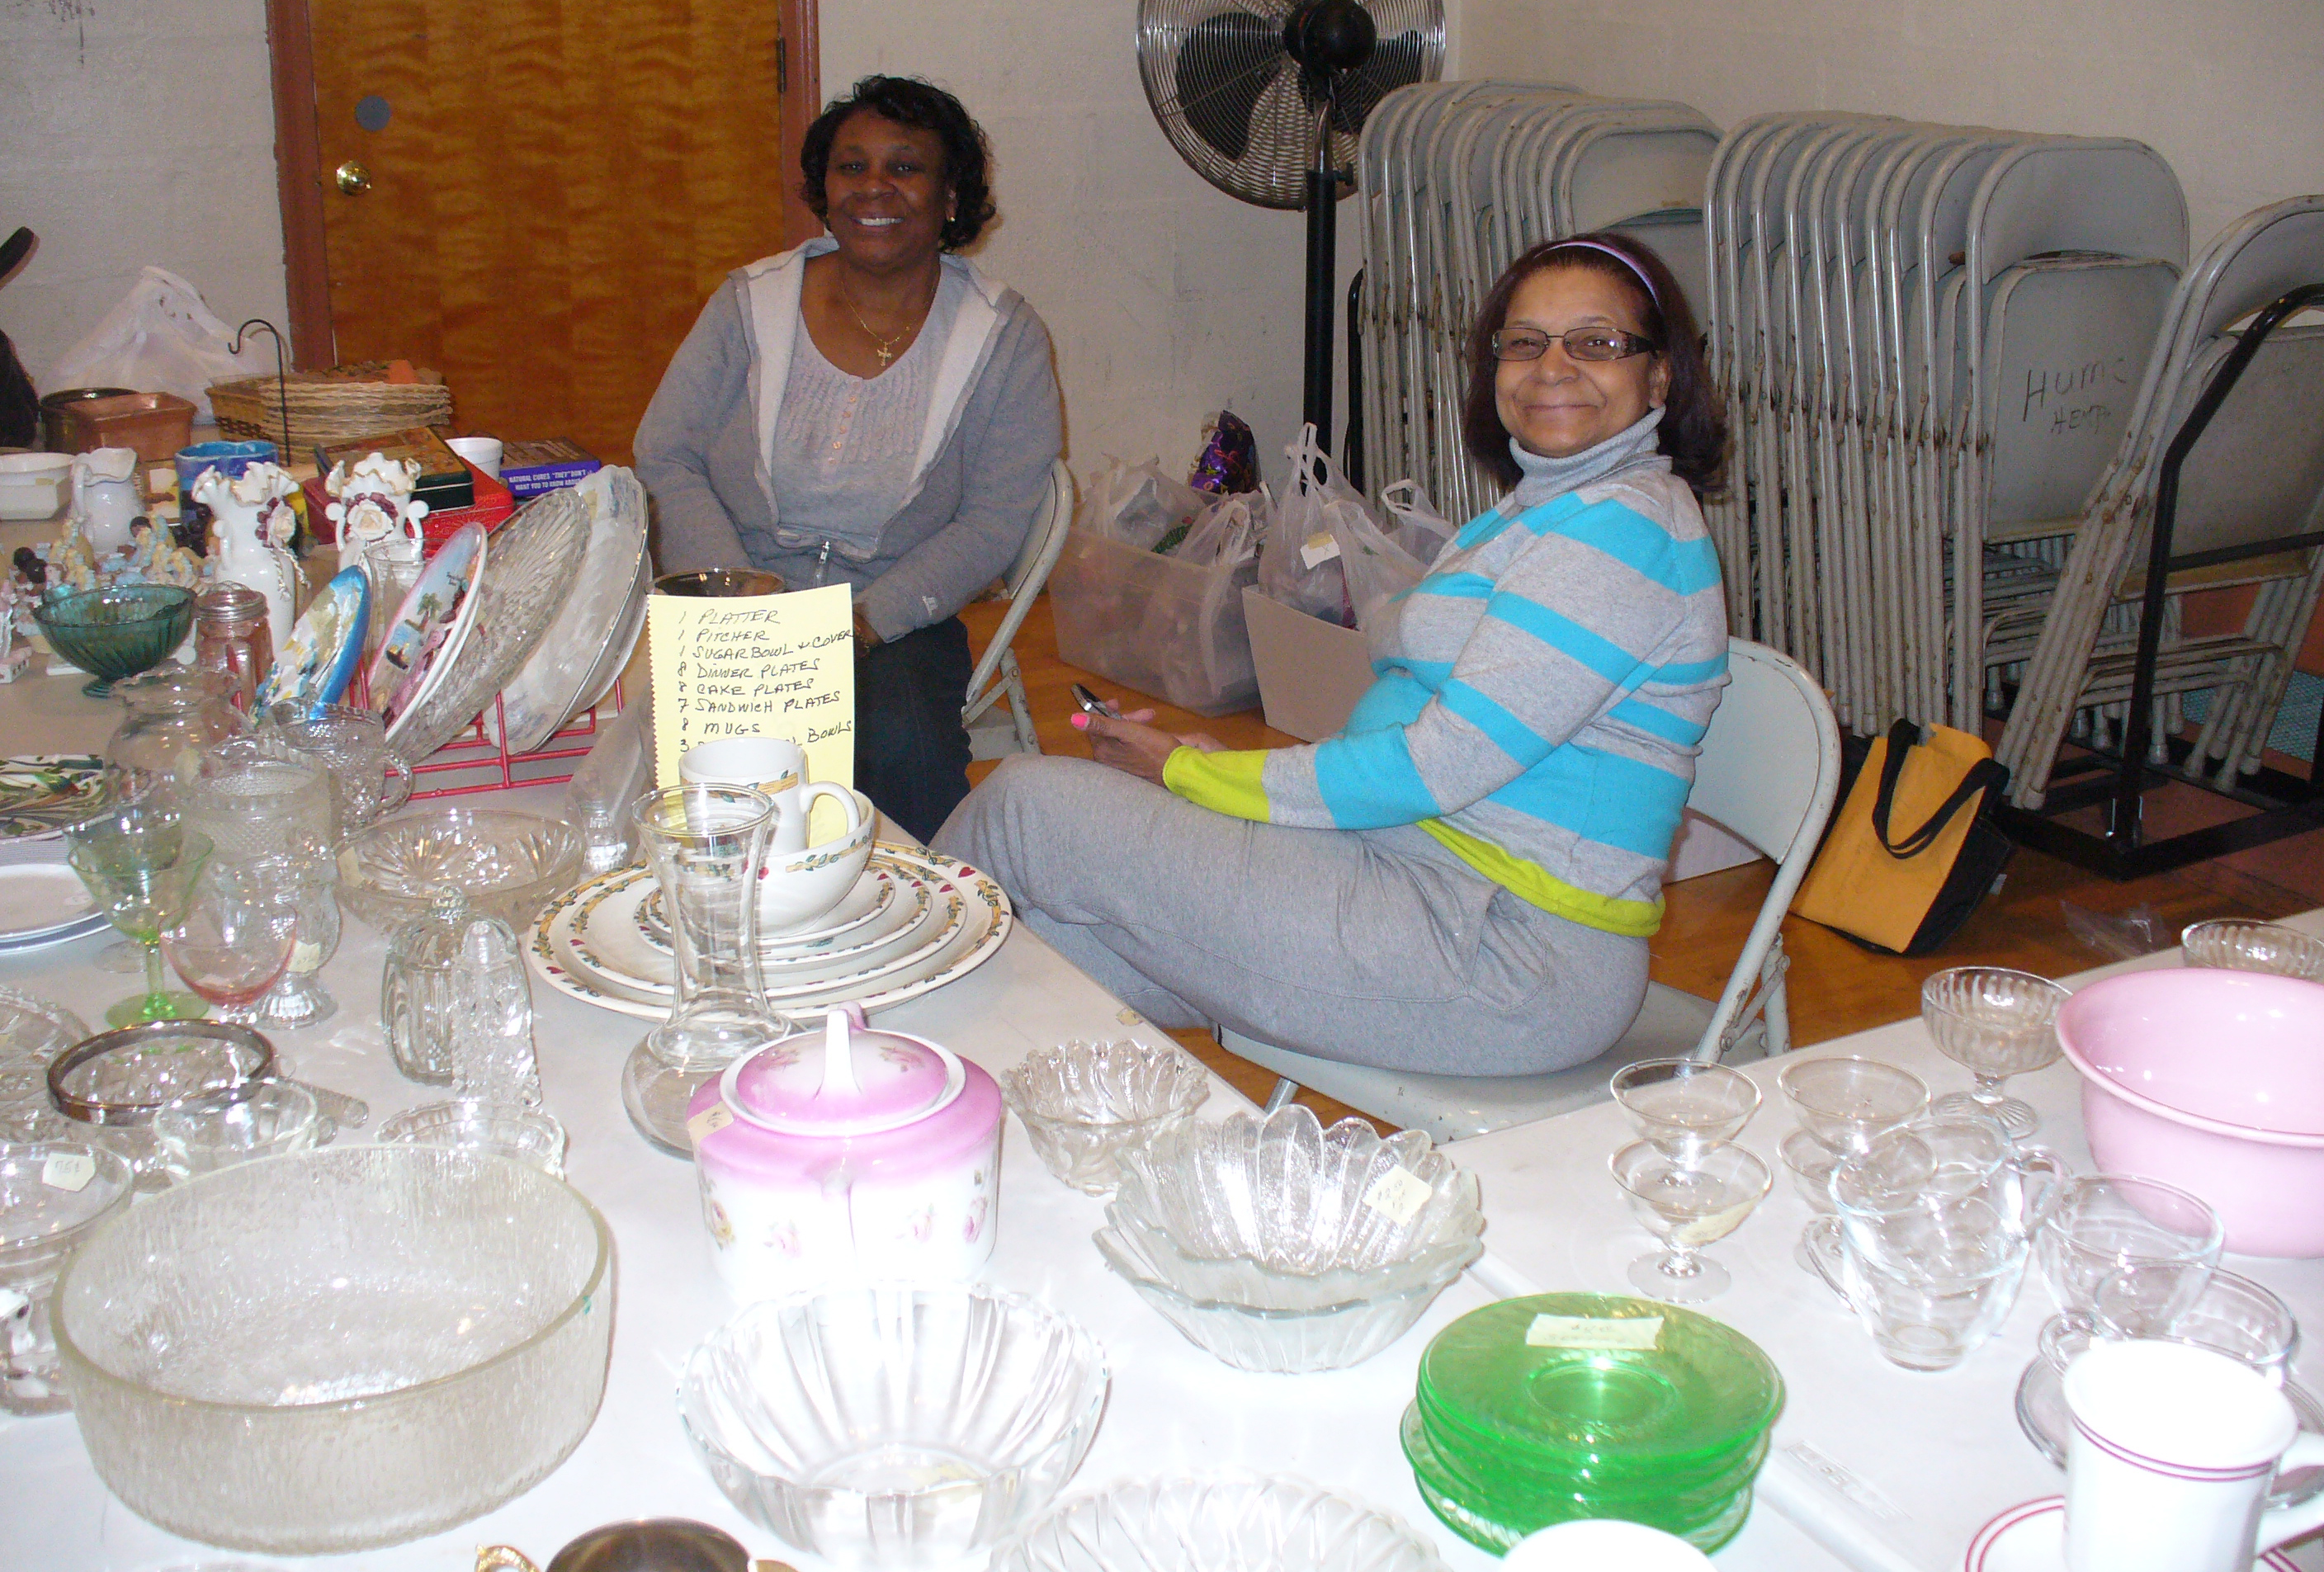 Spring Rummage sale attracted many people